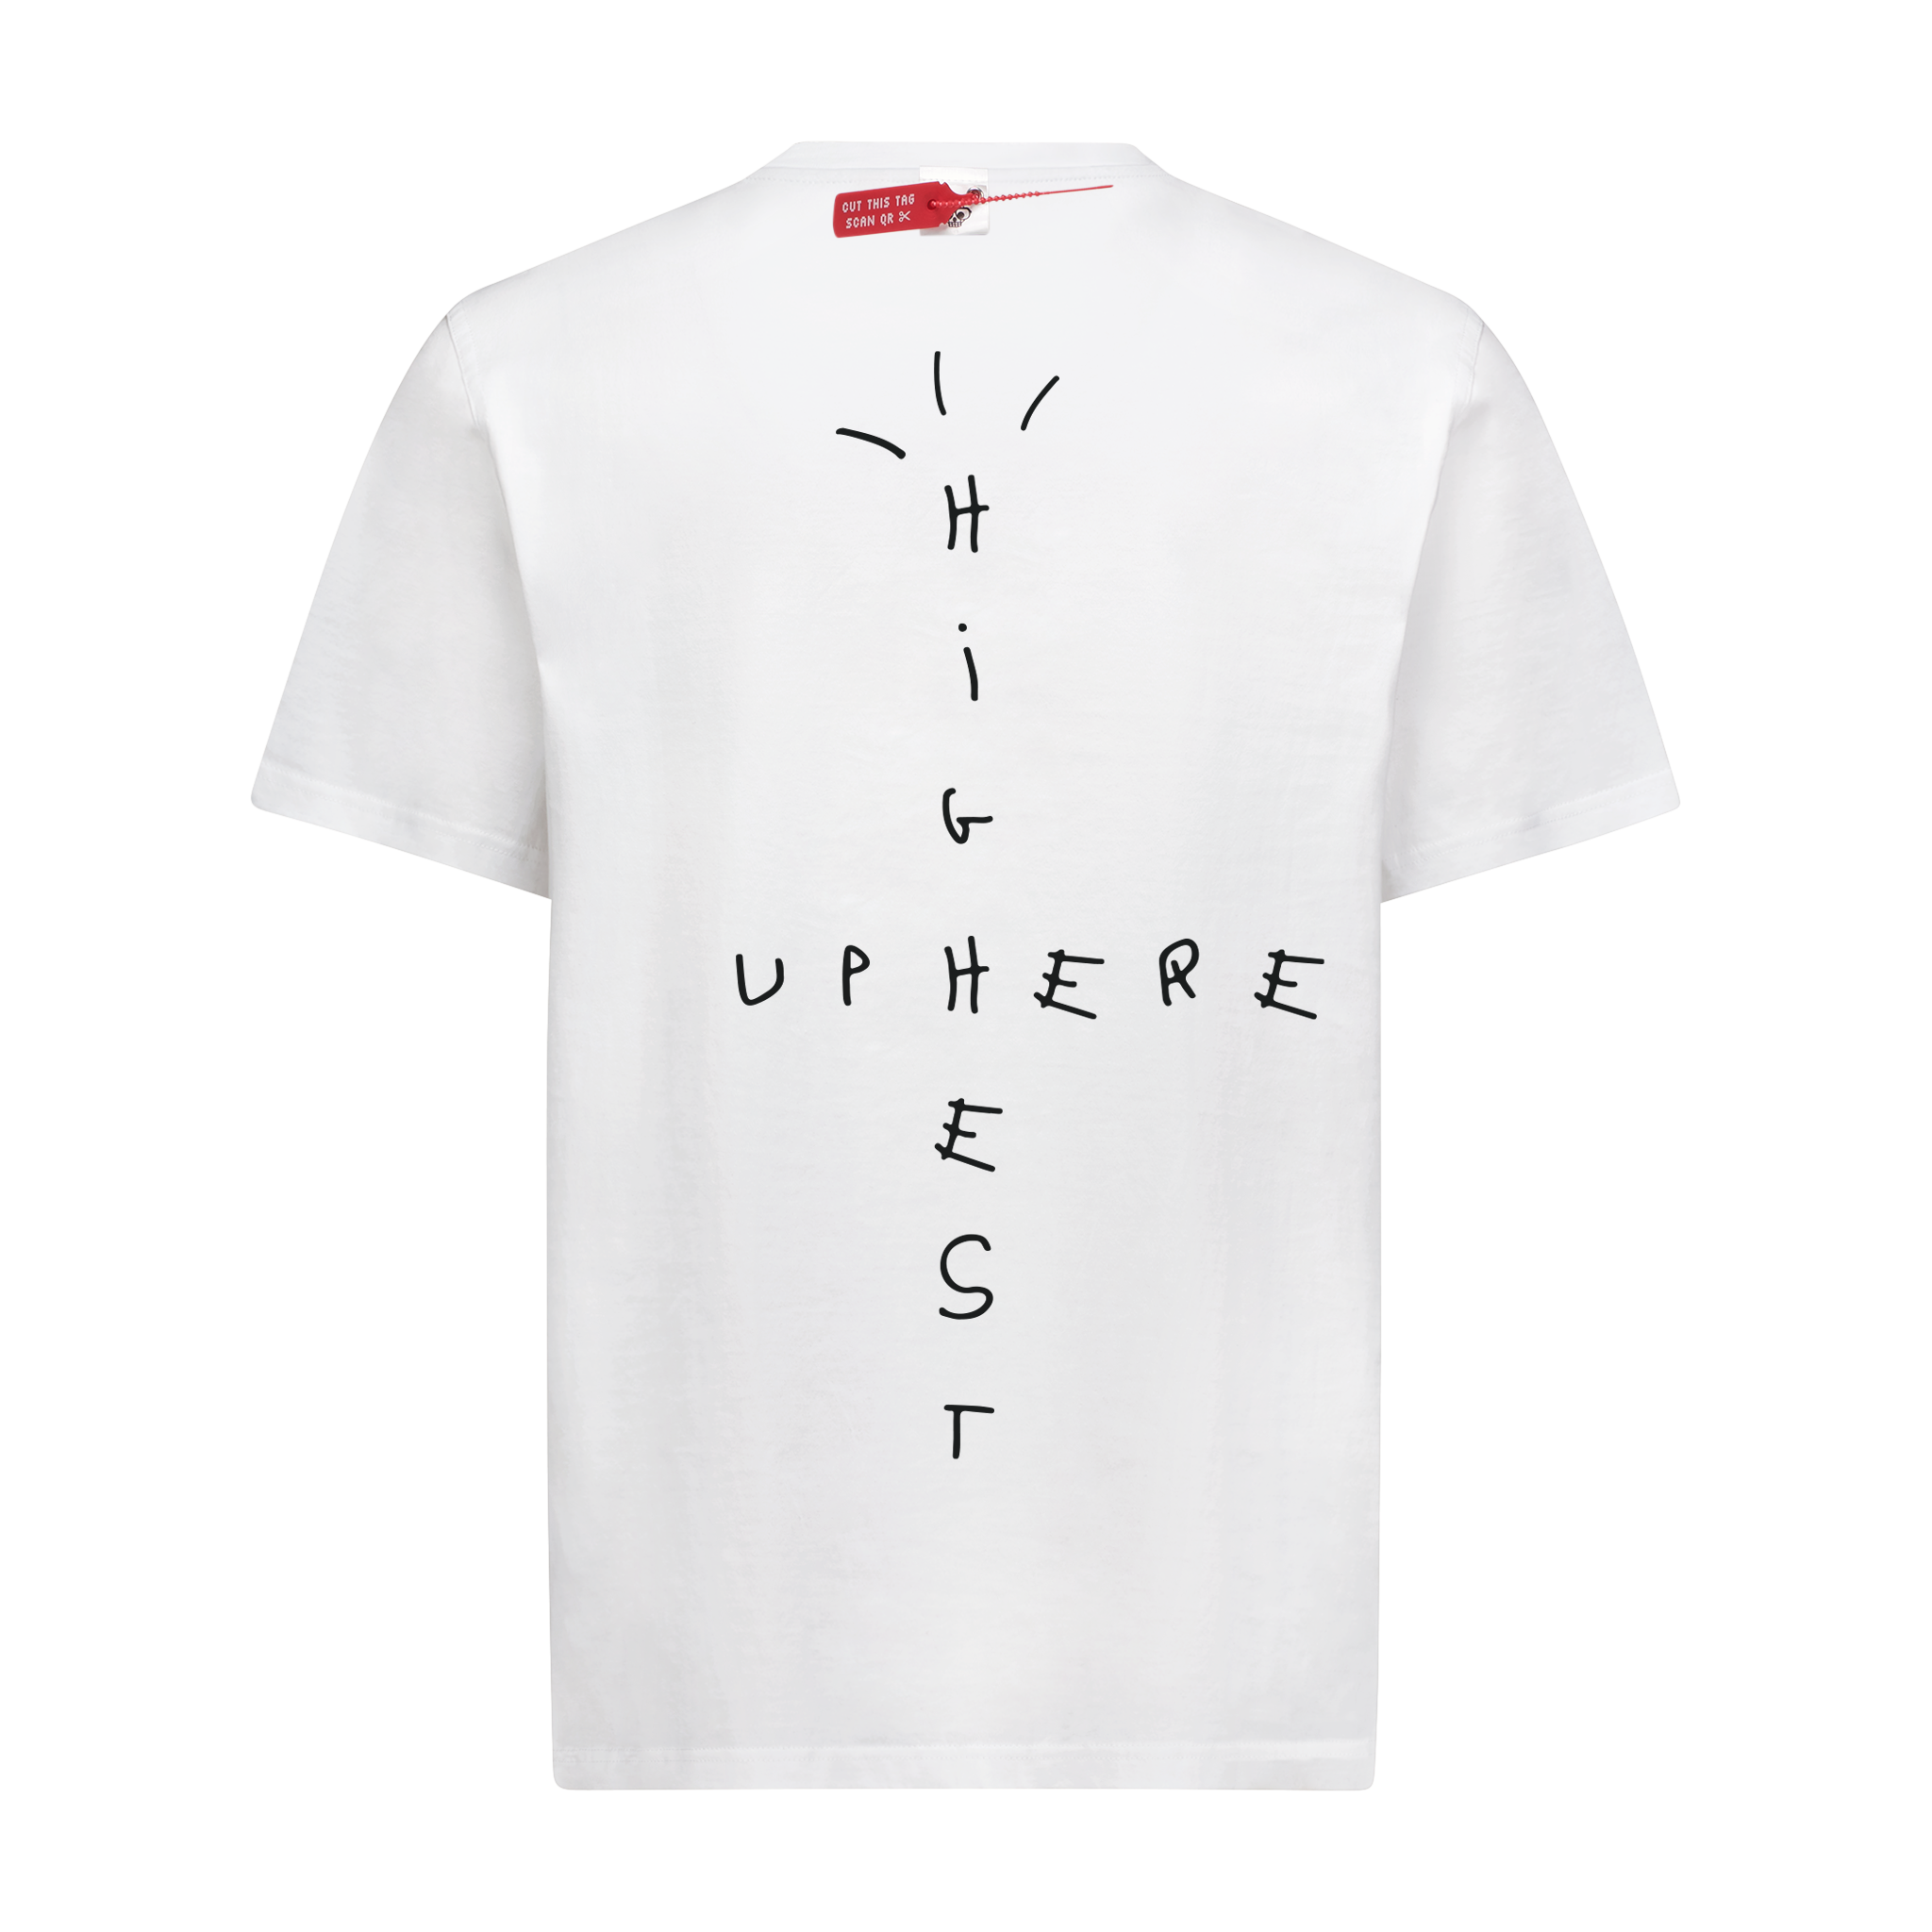 HIGHEST UP HERE TEE